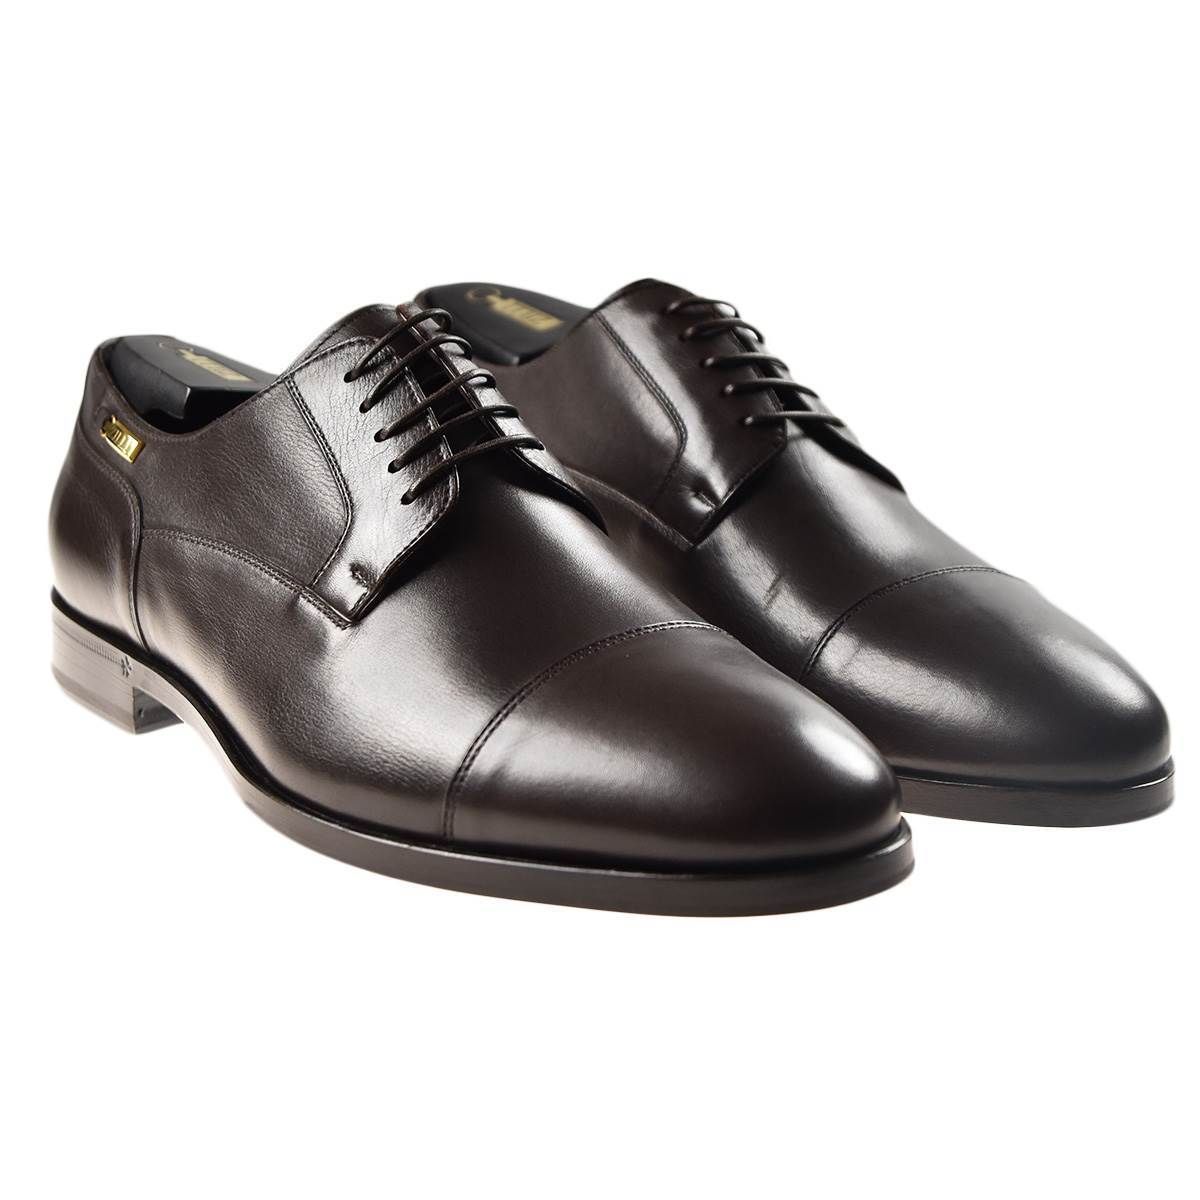 ZILLI Brown Leather Shoes